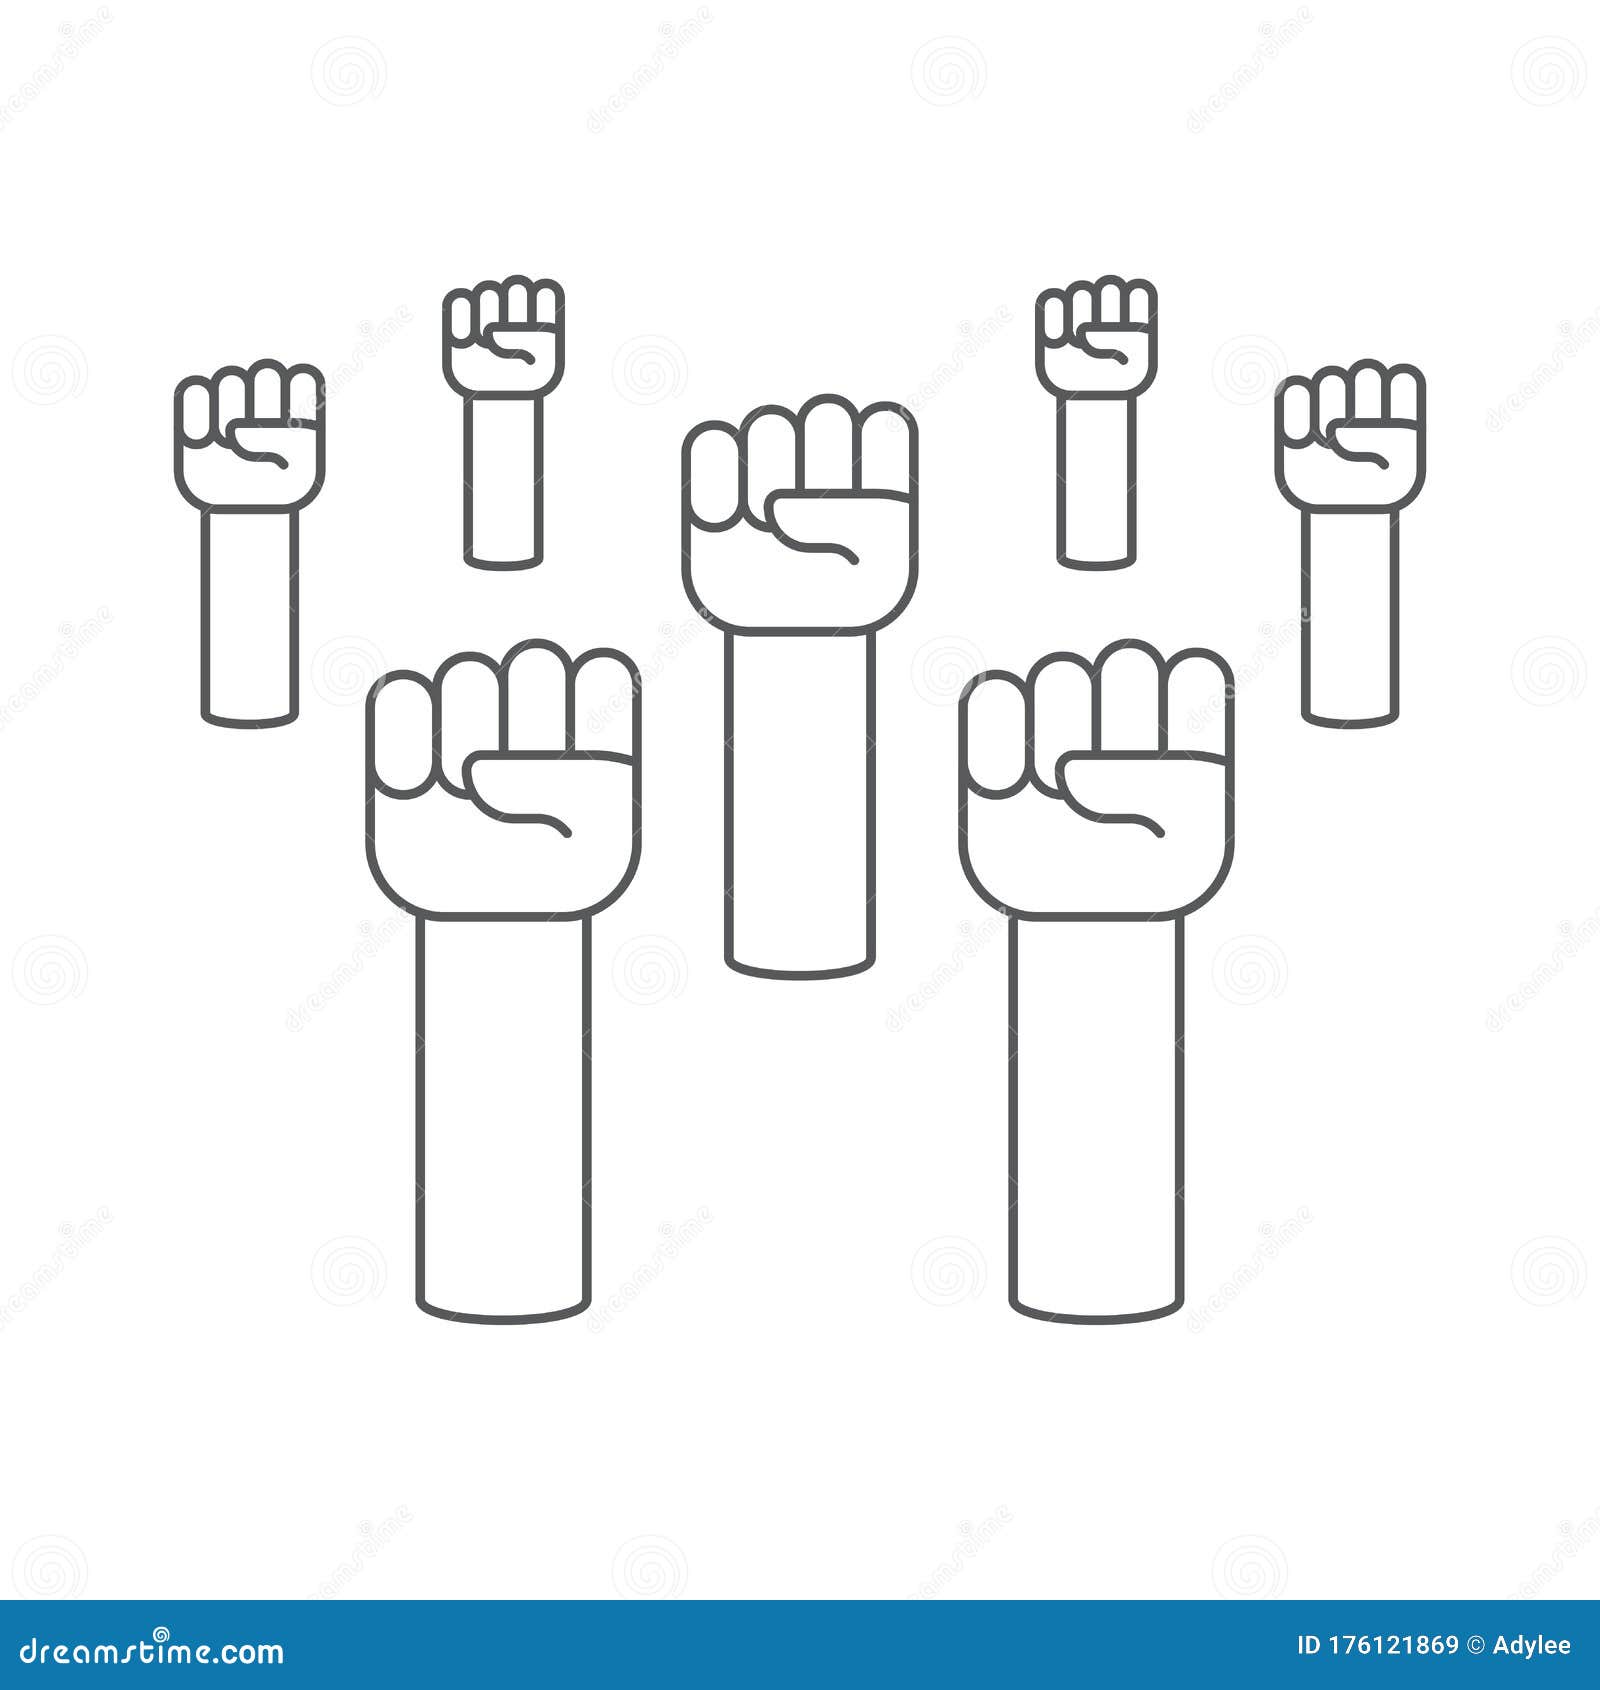 Fist Hand Up Gesture Vector Icon Symbol Isolated on White Background ...